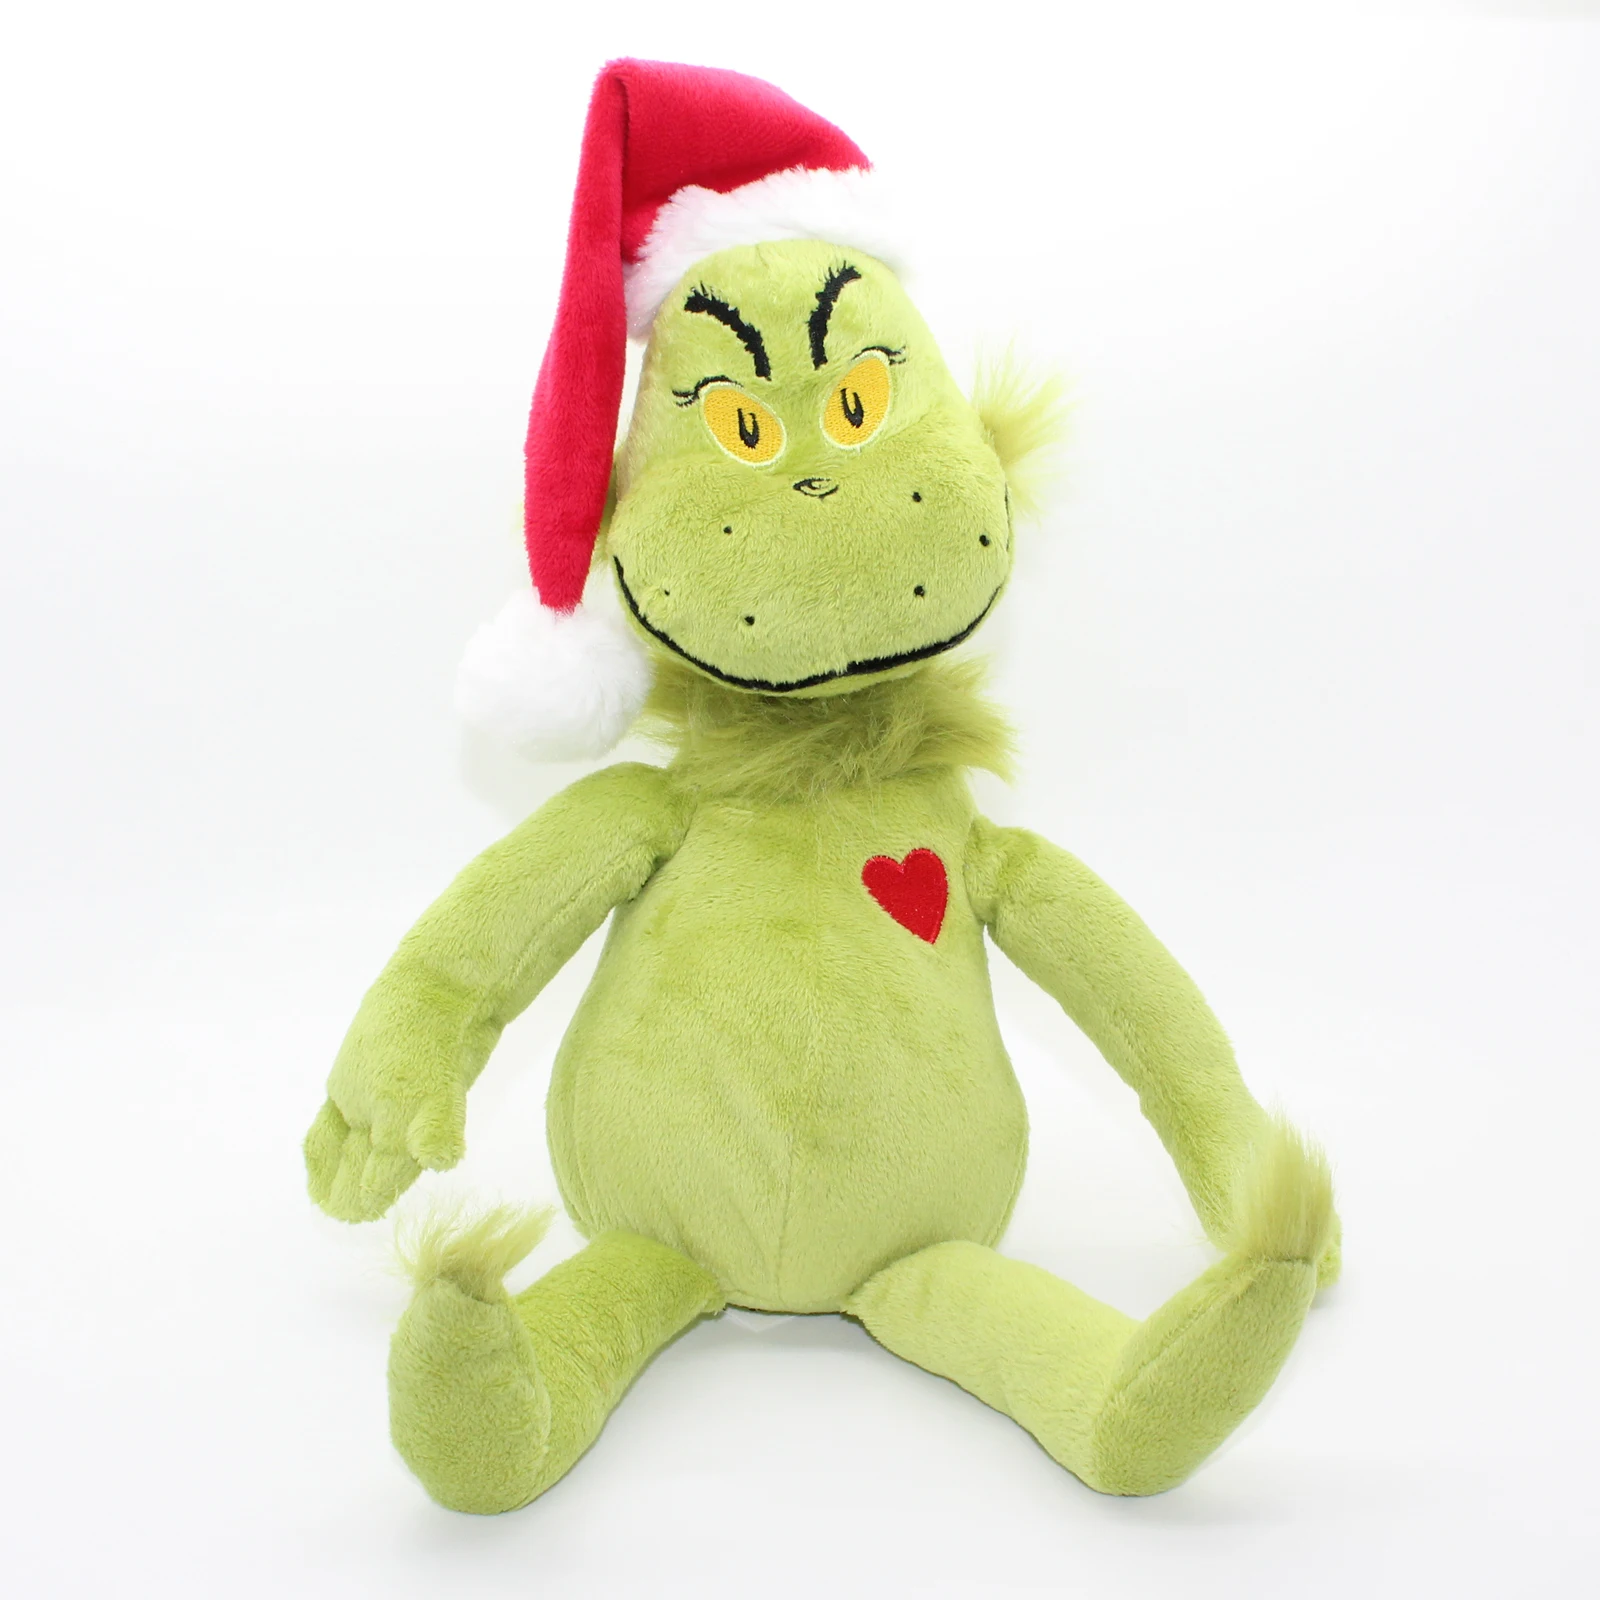 where can i buy a grinch doll